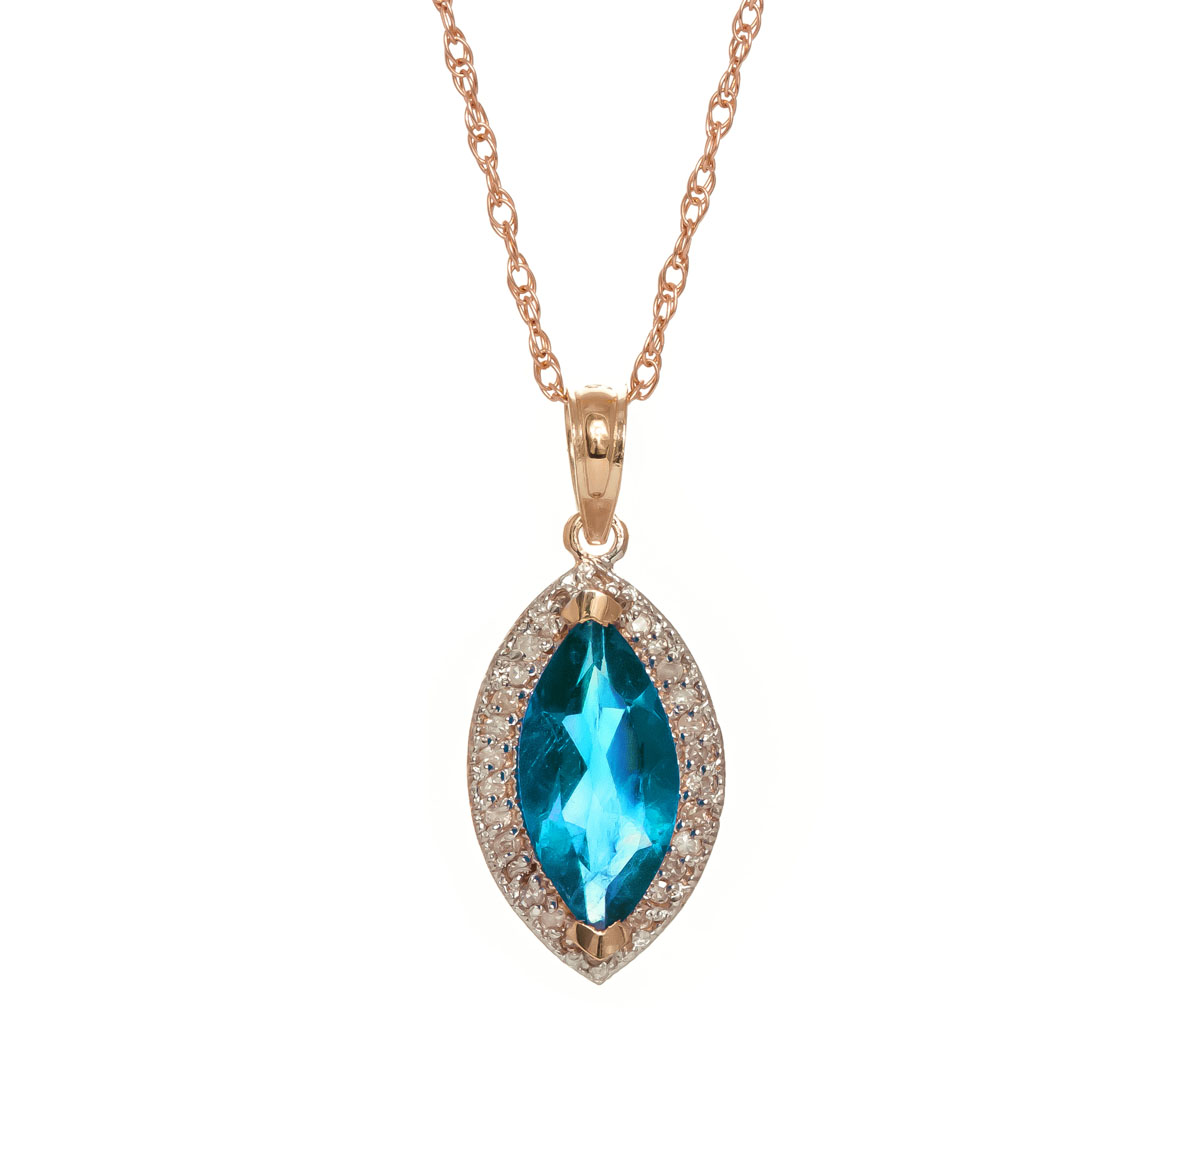 Blue Topaz Halo Pendant Necklace 2.4 ctw in 9ct Rose Gold